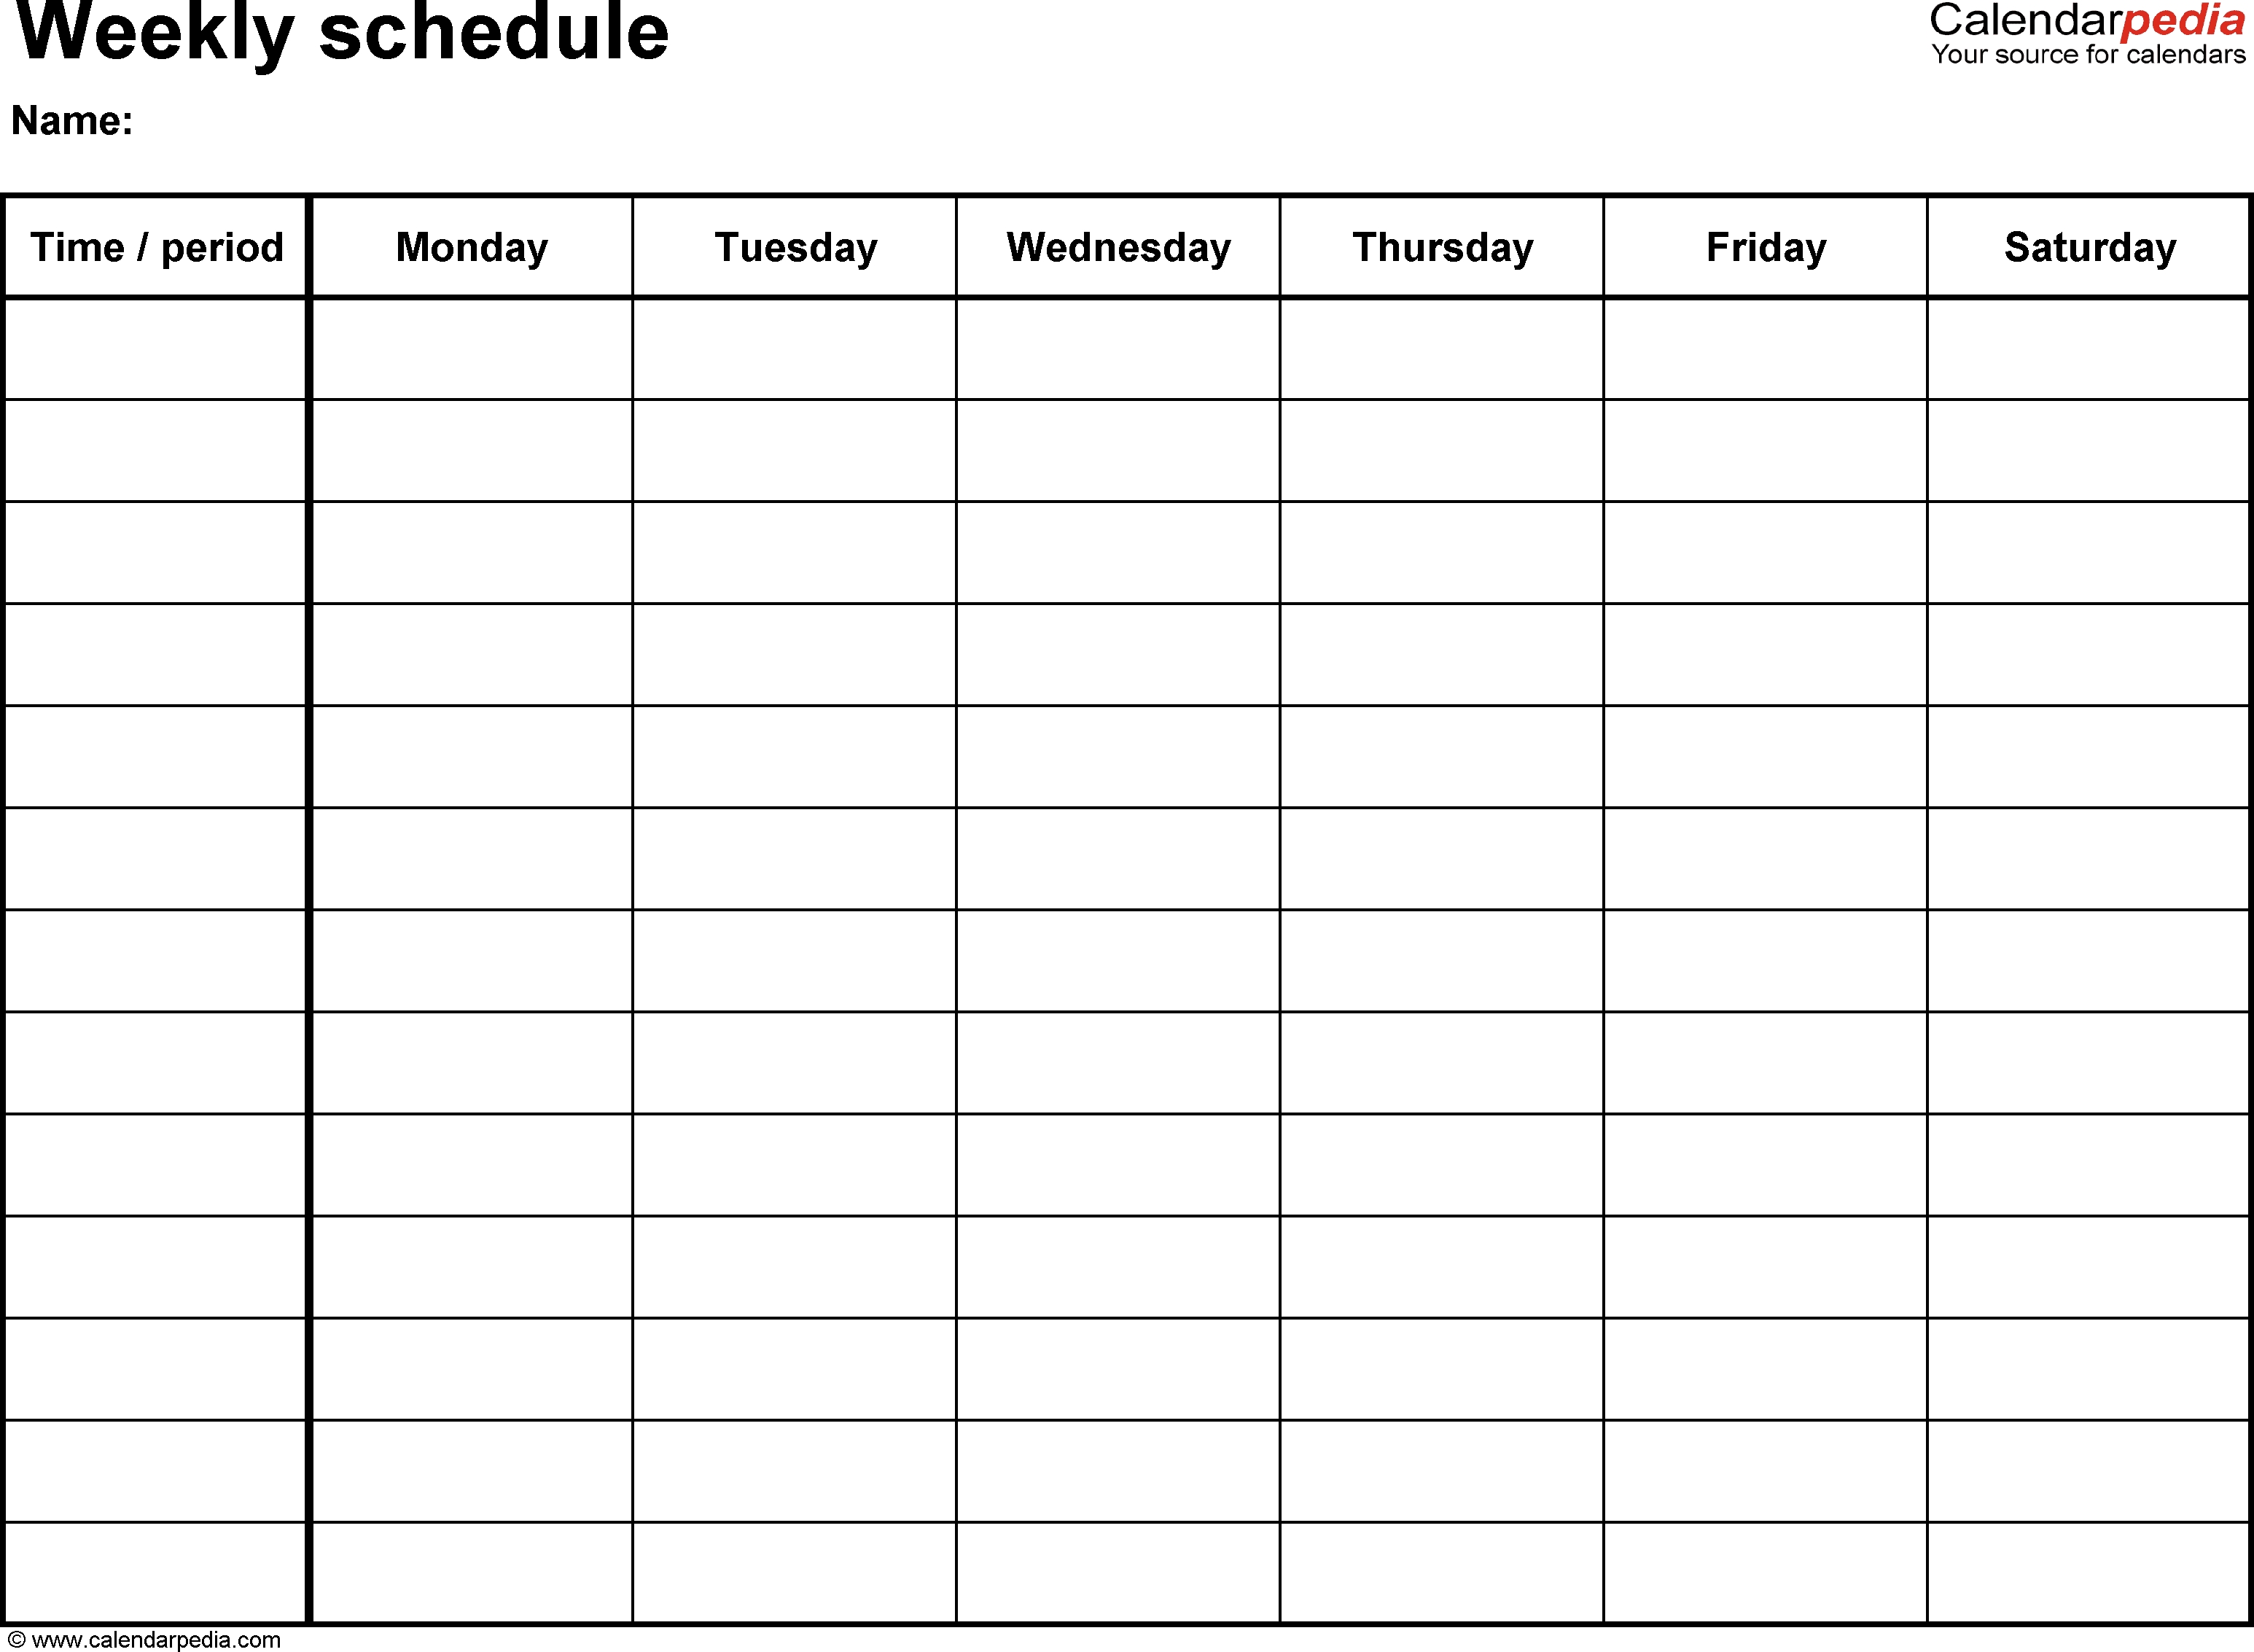 Free Weekly Schedule Templates For Word - 18 Templates-Printable Blank Monday Through Friday Calendars